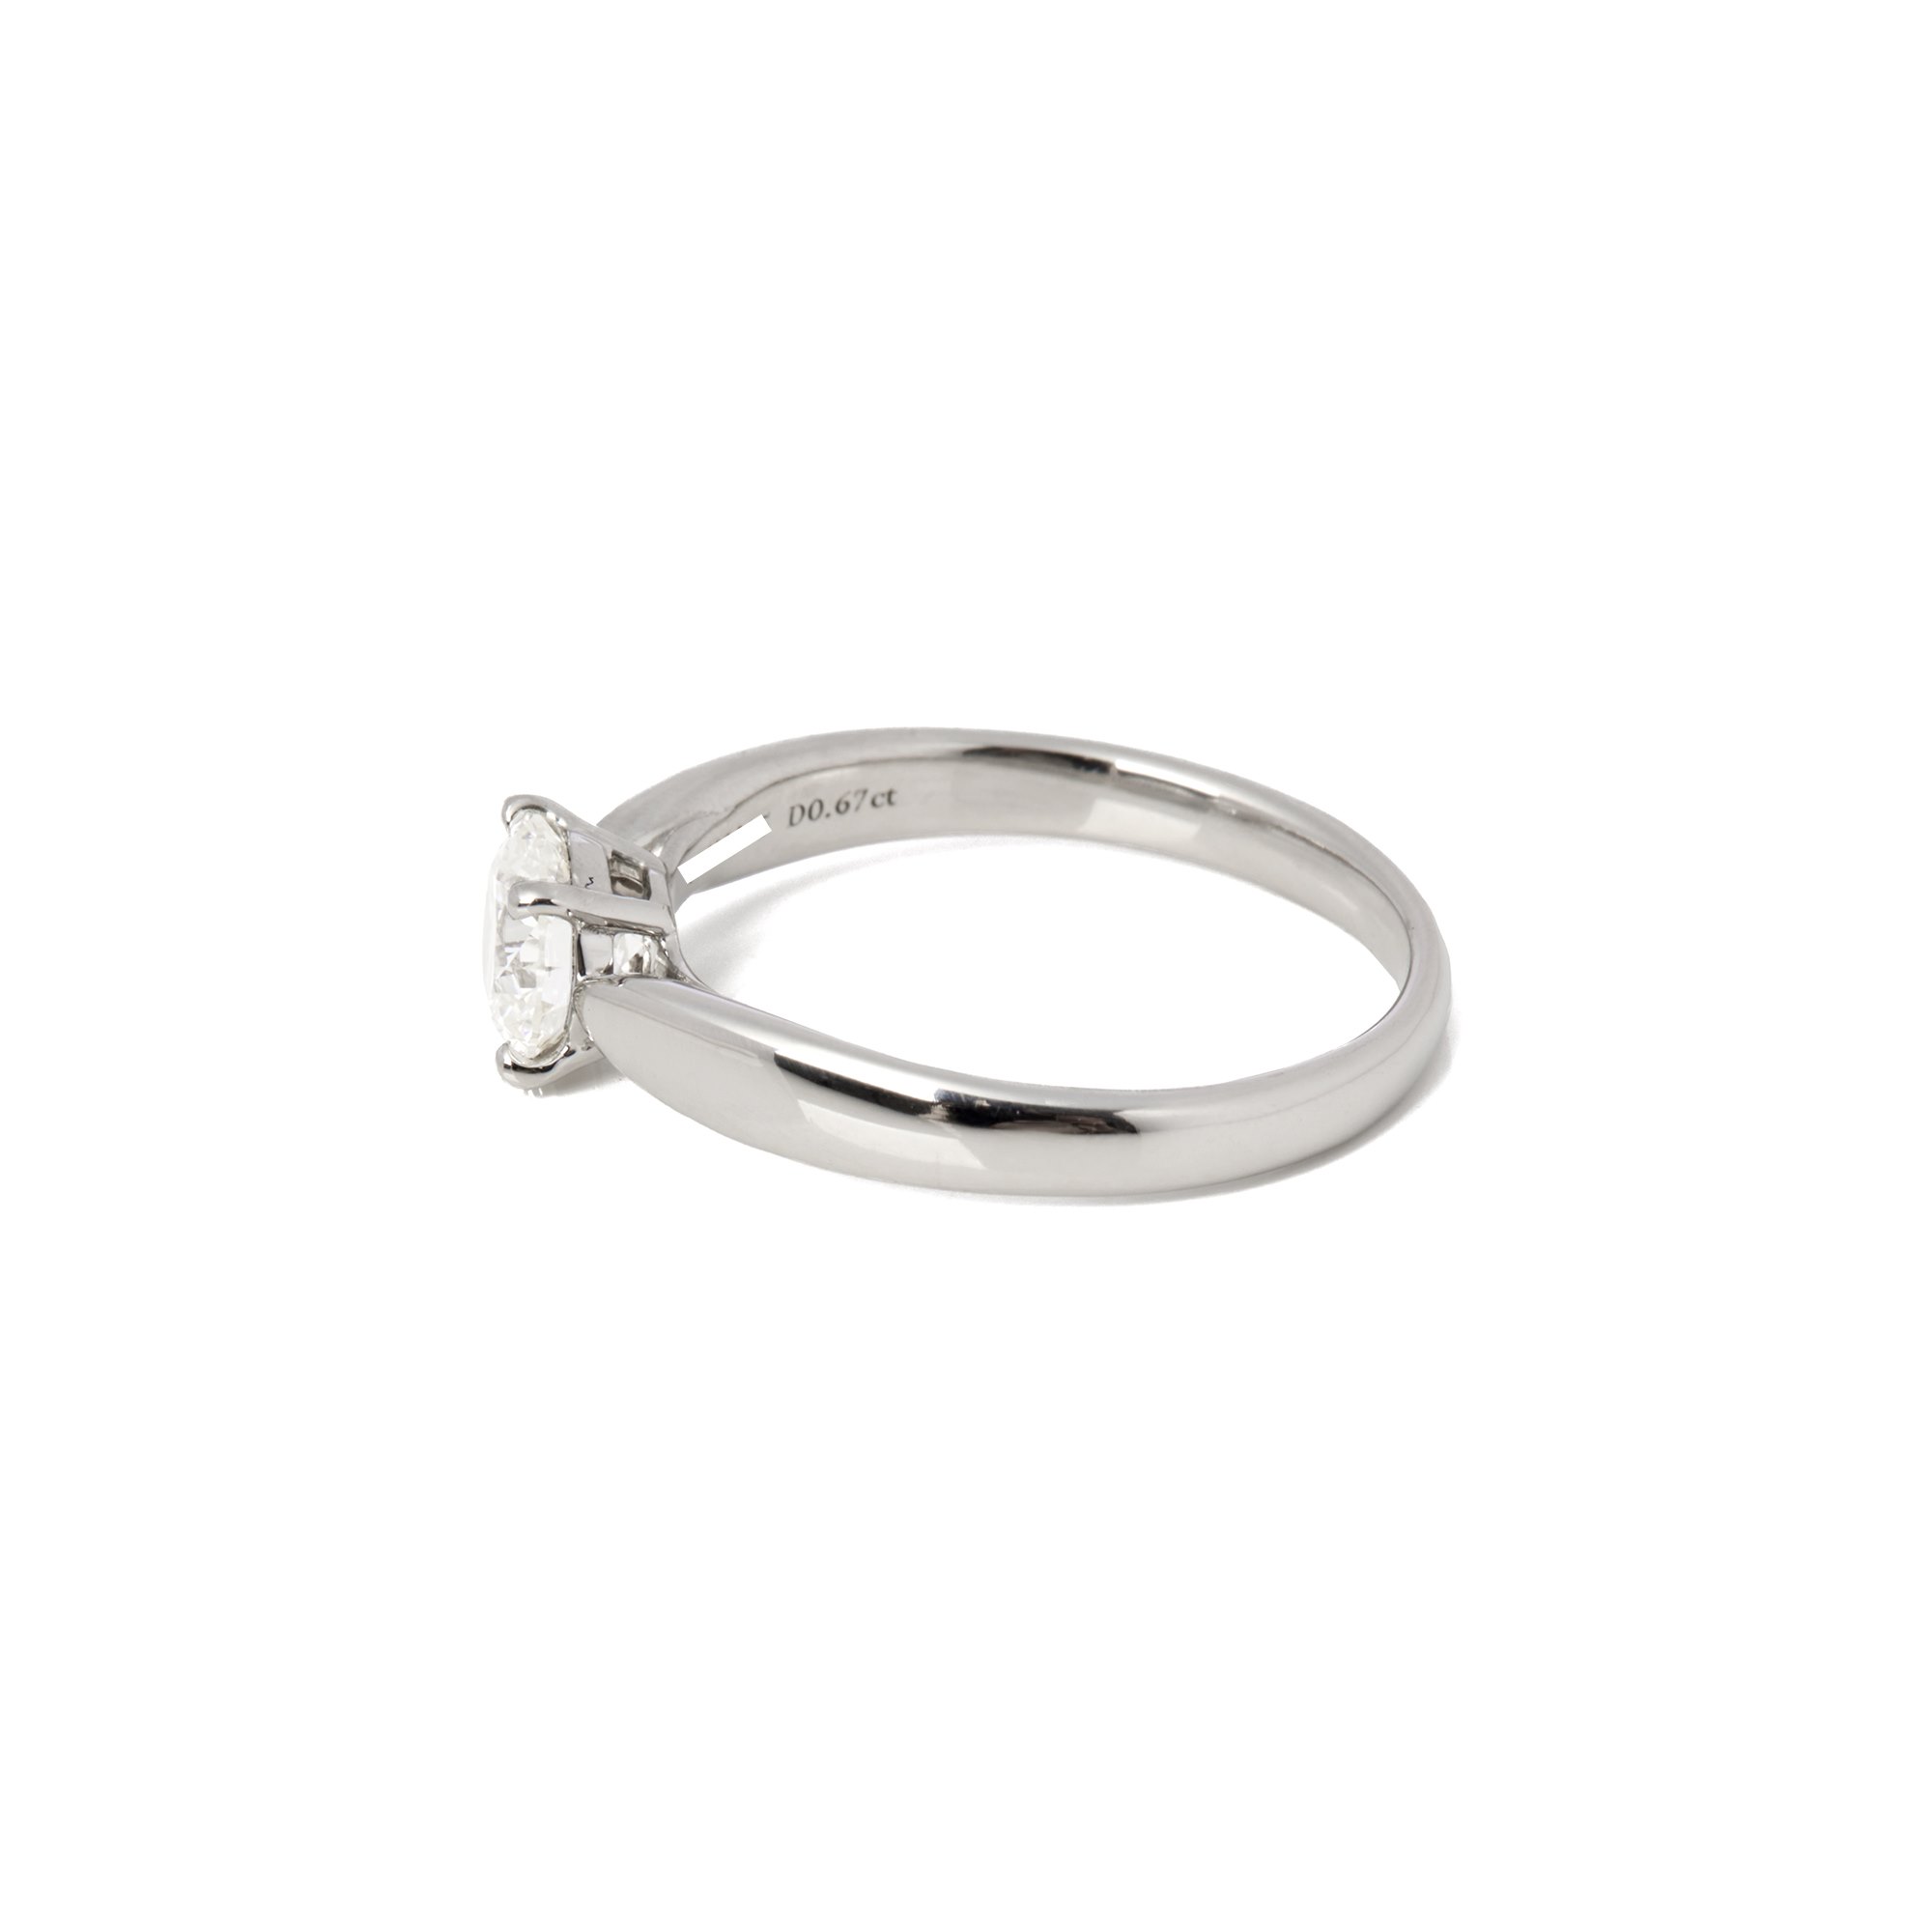 Tiffany & Co. 0.67ct Harmony Round Solitaire Ring